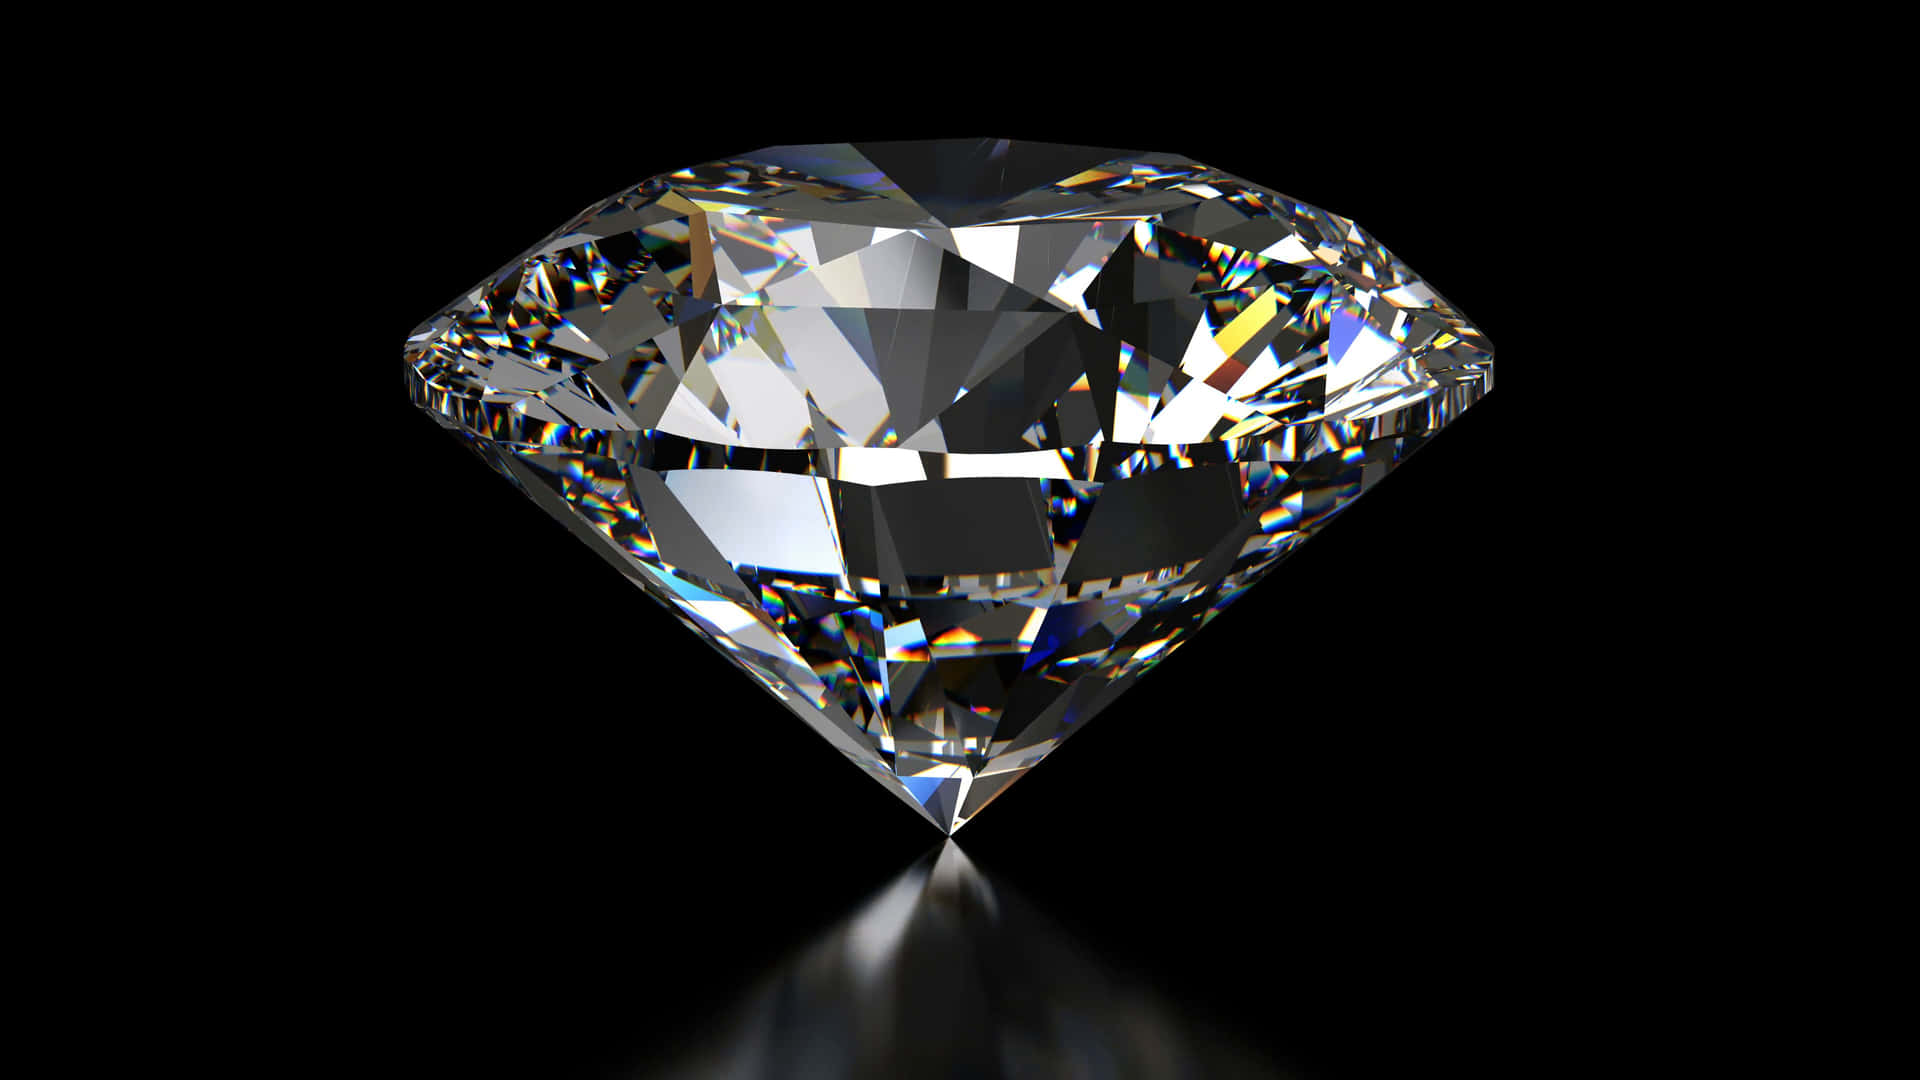 "The Beauty of a Diamond is Unparalleled"